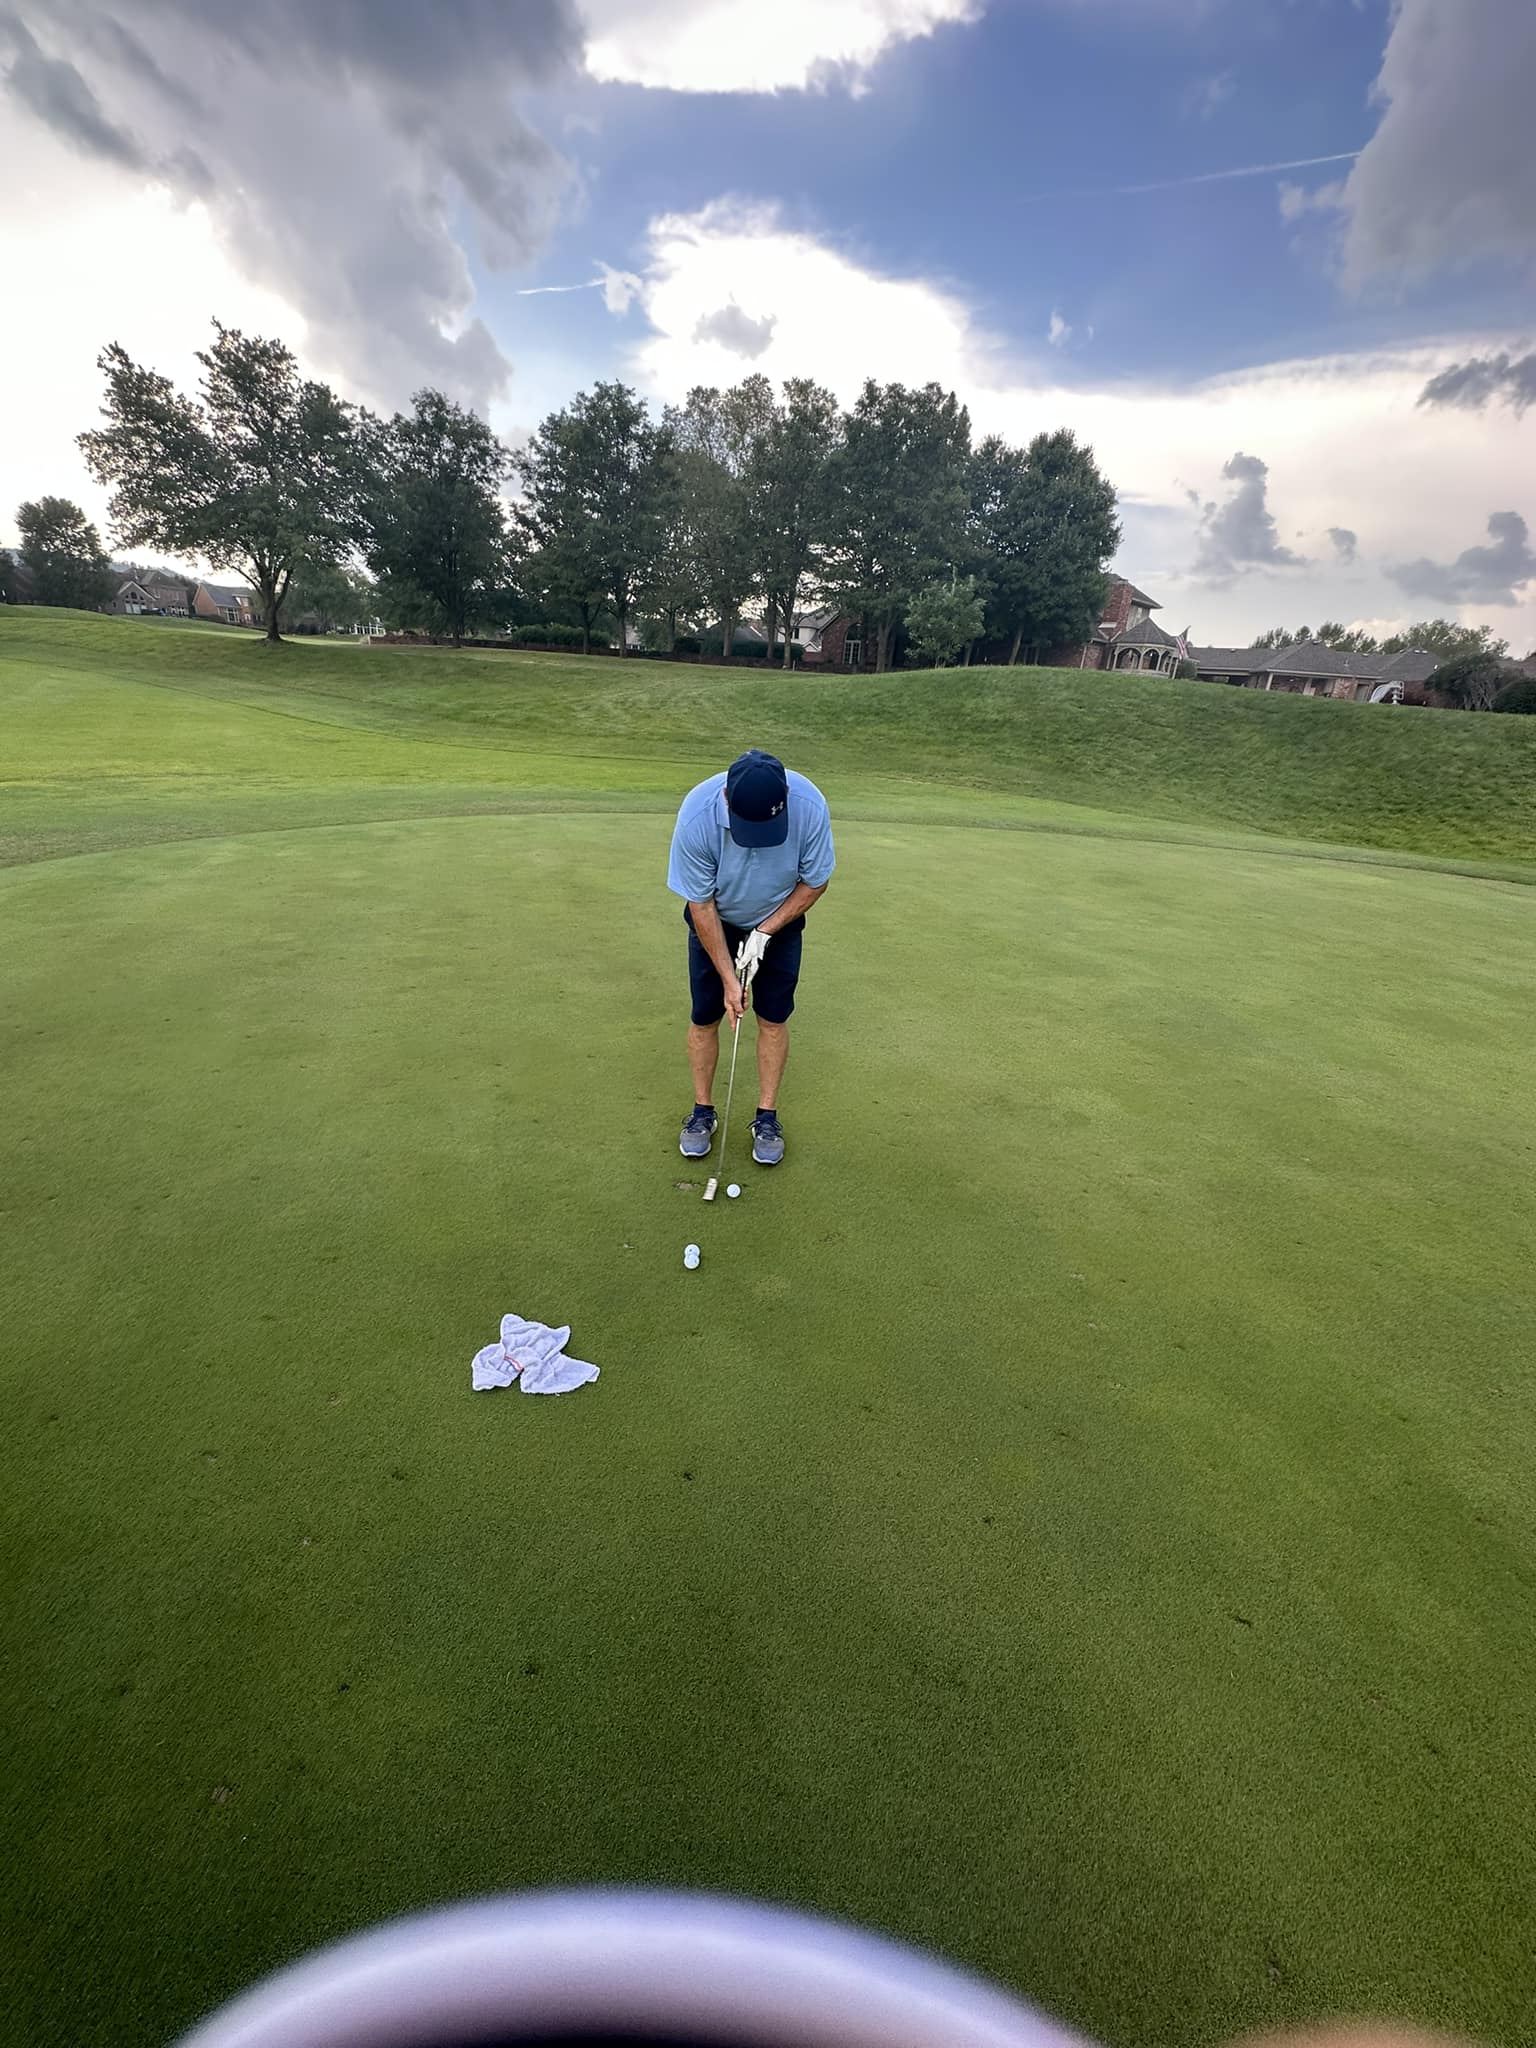 A golfer lining up for a put.